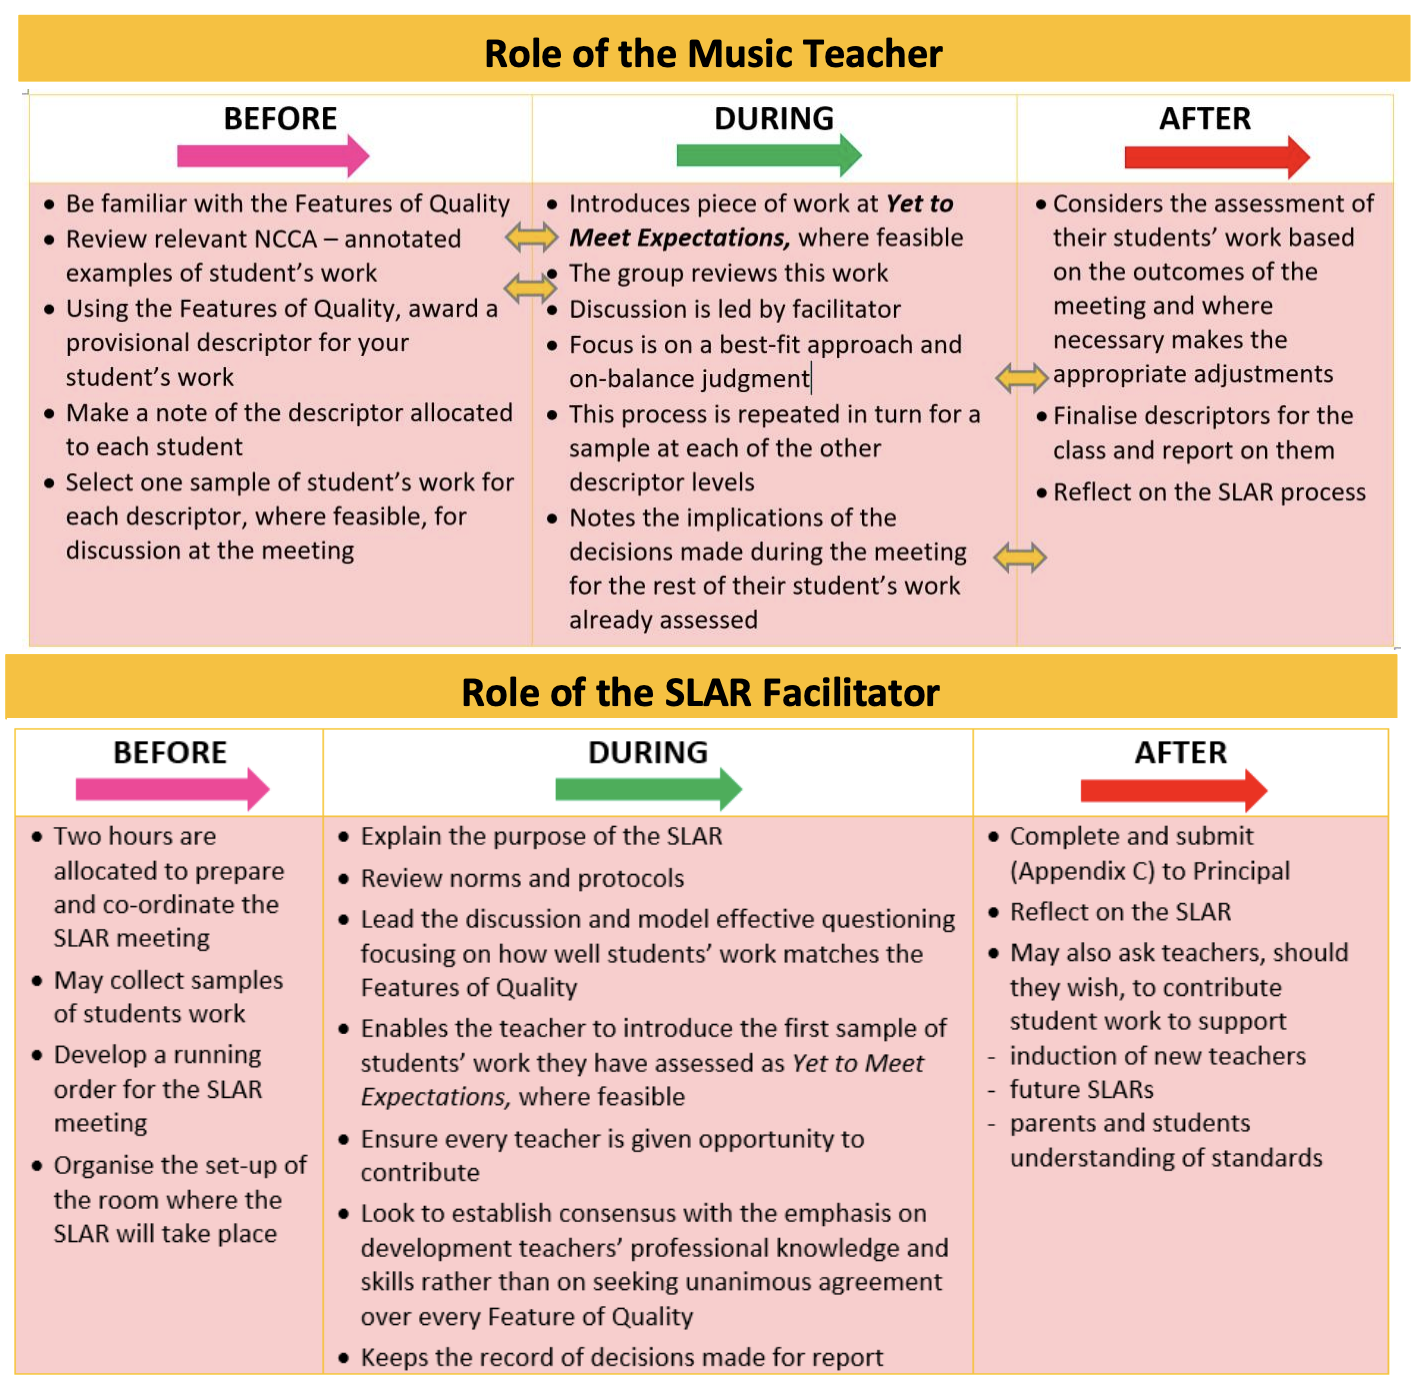 Roles Before, During and After the SLAR